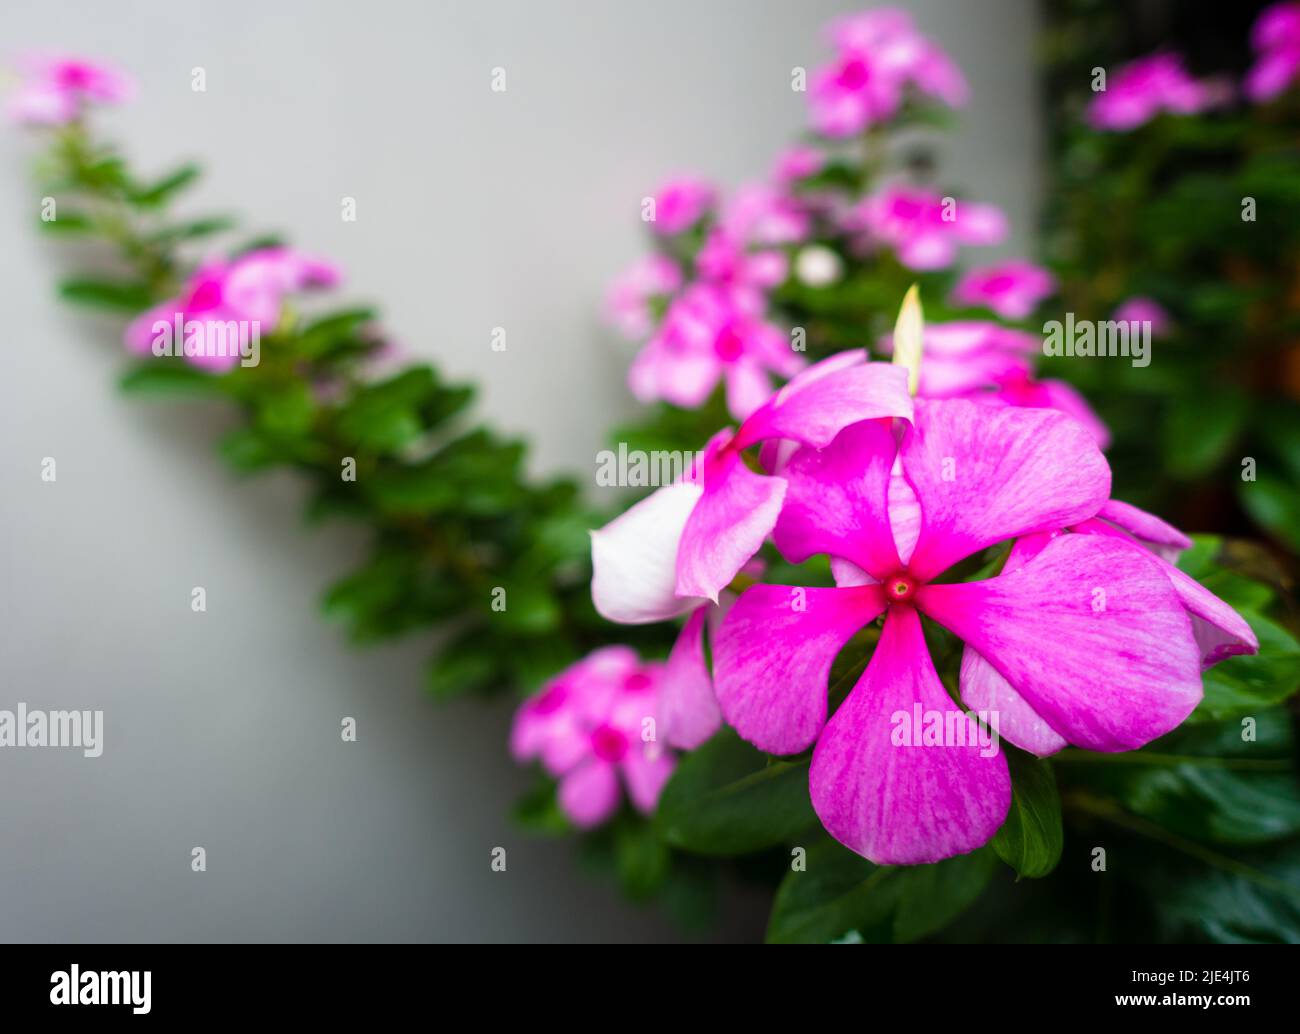 Madagascar Periwinkle, Catharanthus roseus, commonly known as bright eyes, is a species of flowering plant in the family Apocynaceae. Indian Garden Stock Photo